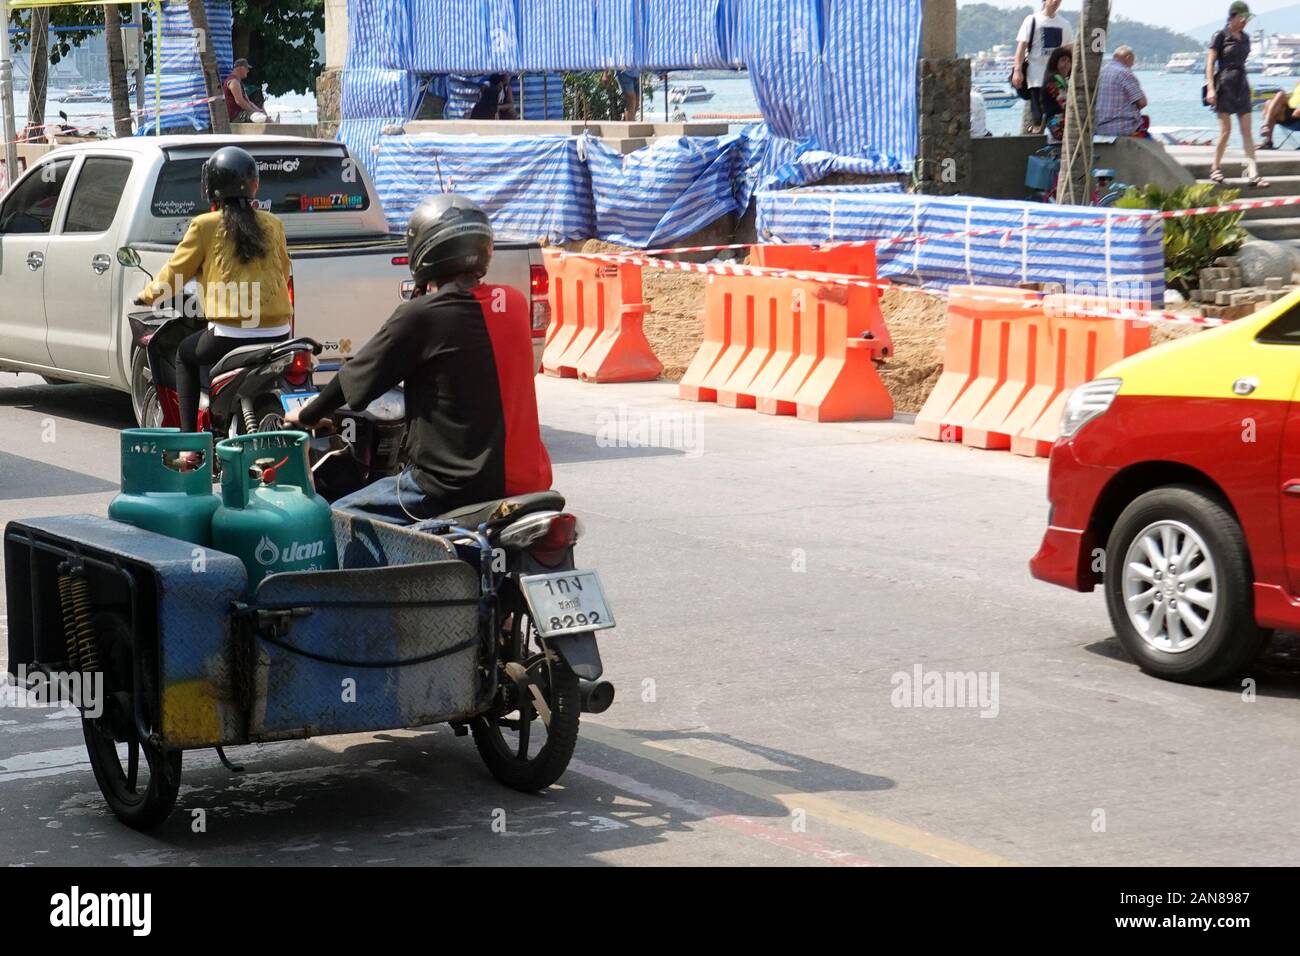 Pattaya, Thailand - December 24, 2019: Man transports a gas bottles with motorcycle on Beach Road. Stock Photo